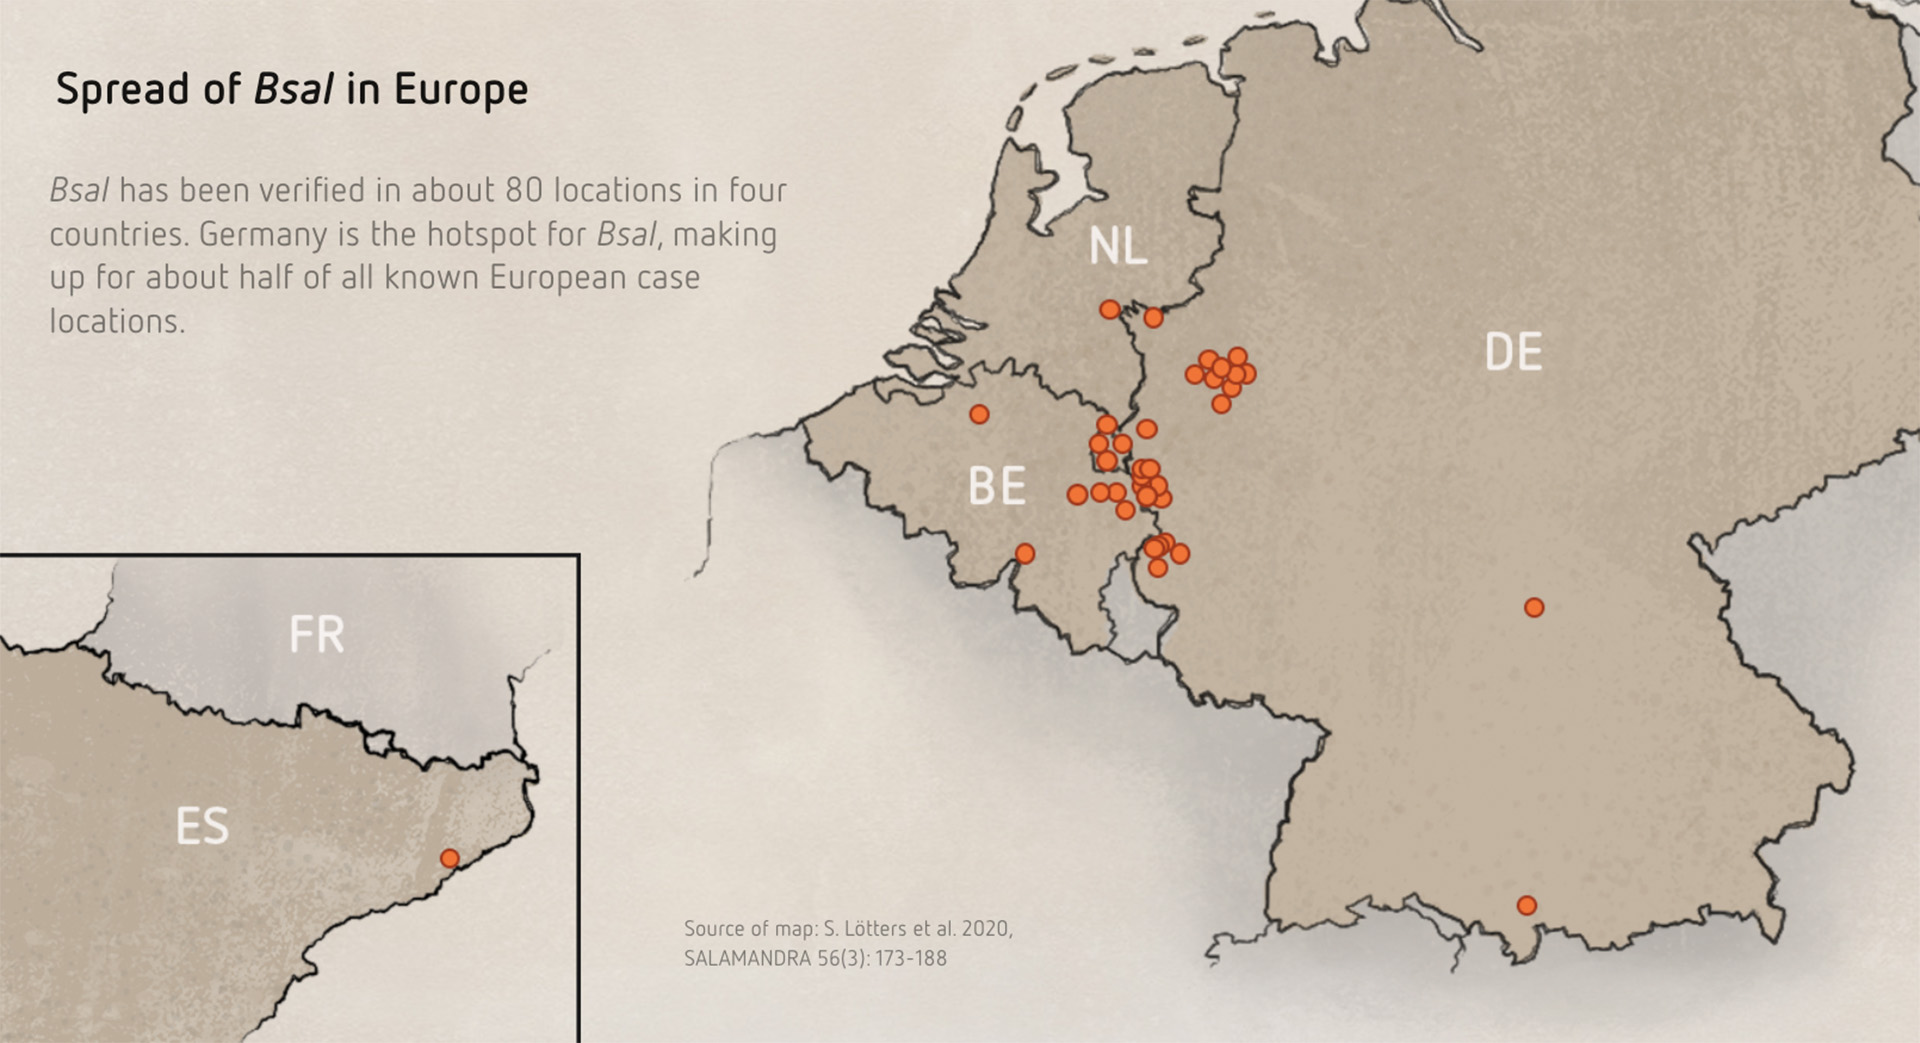 A graphic showing the spread of Bsal in Europe, the fungus that threatens the fire salamander.